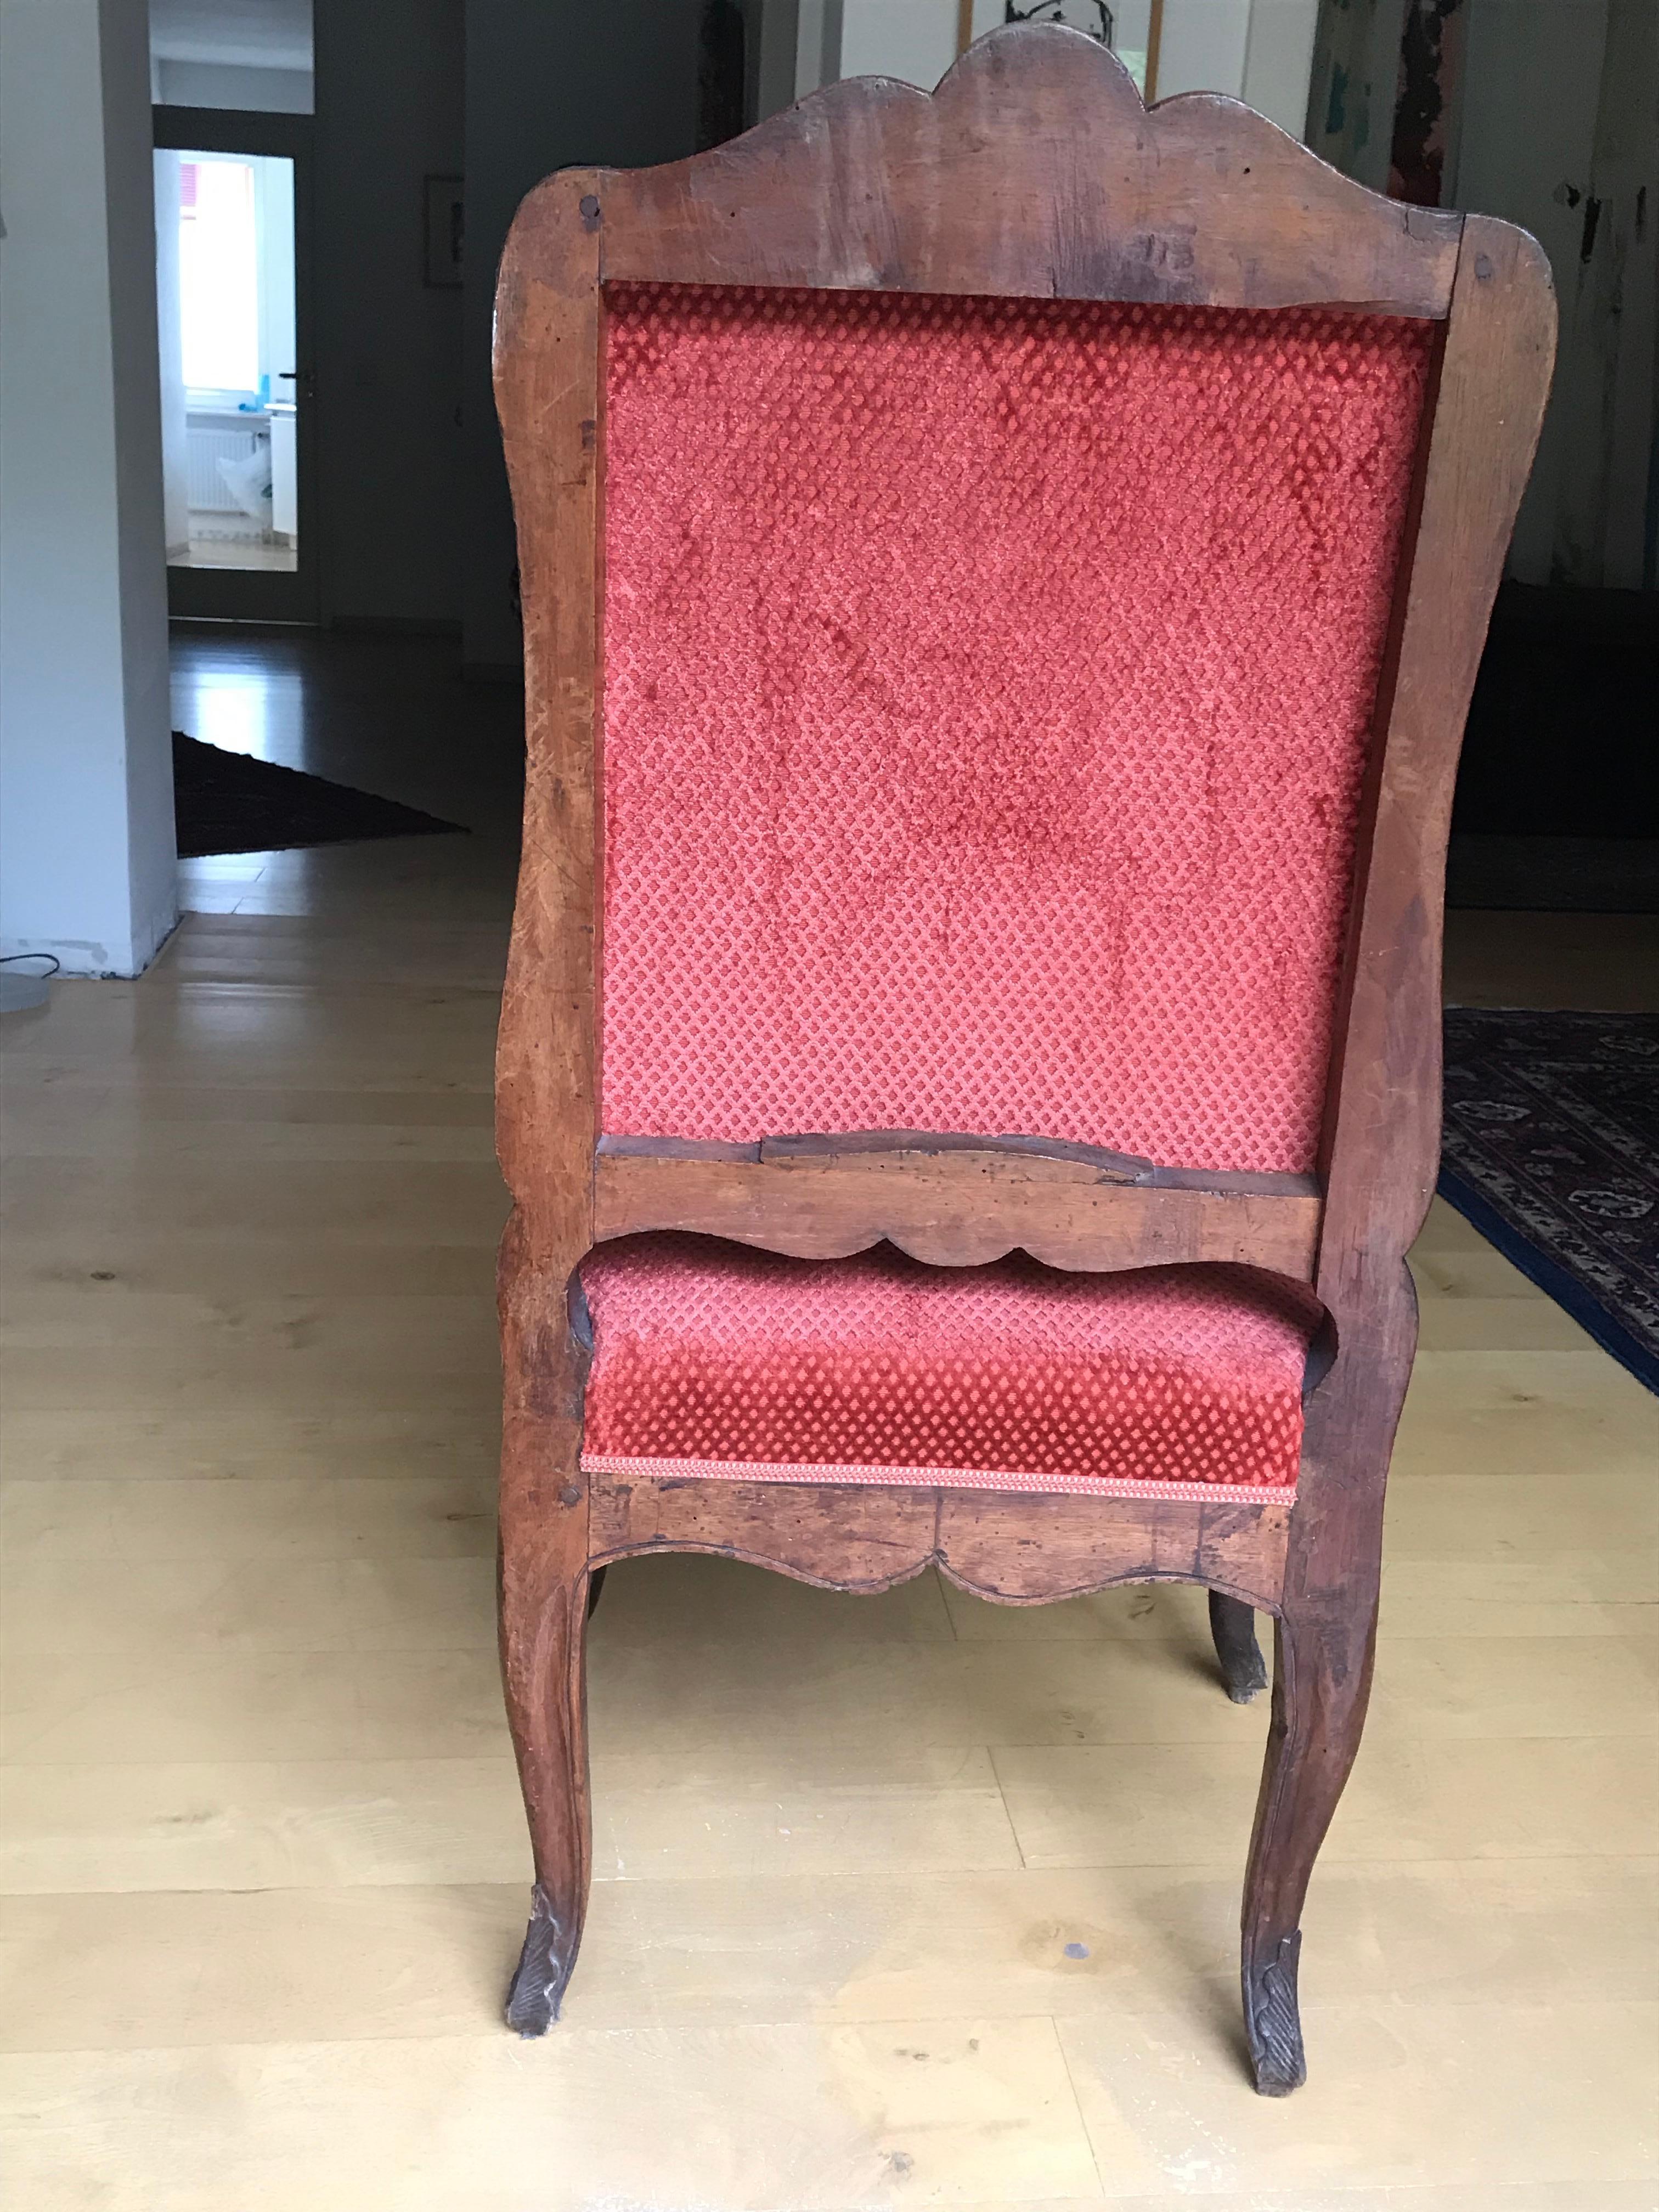 Authentic Southern Italian, Sicilian throne, as it has been traditionally used in the large rural estates for the padrone, for the noble chief. Seating height would be perfect for a modern writing desk. The seating upholstery is quite firm, giving a